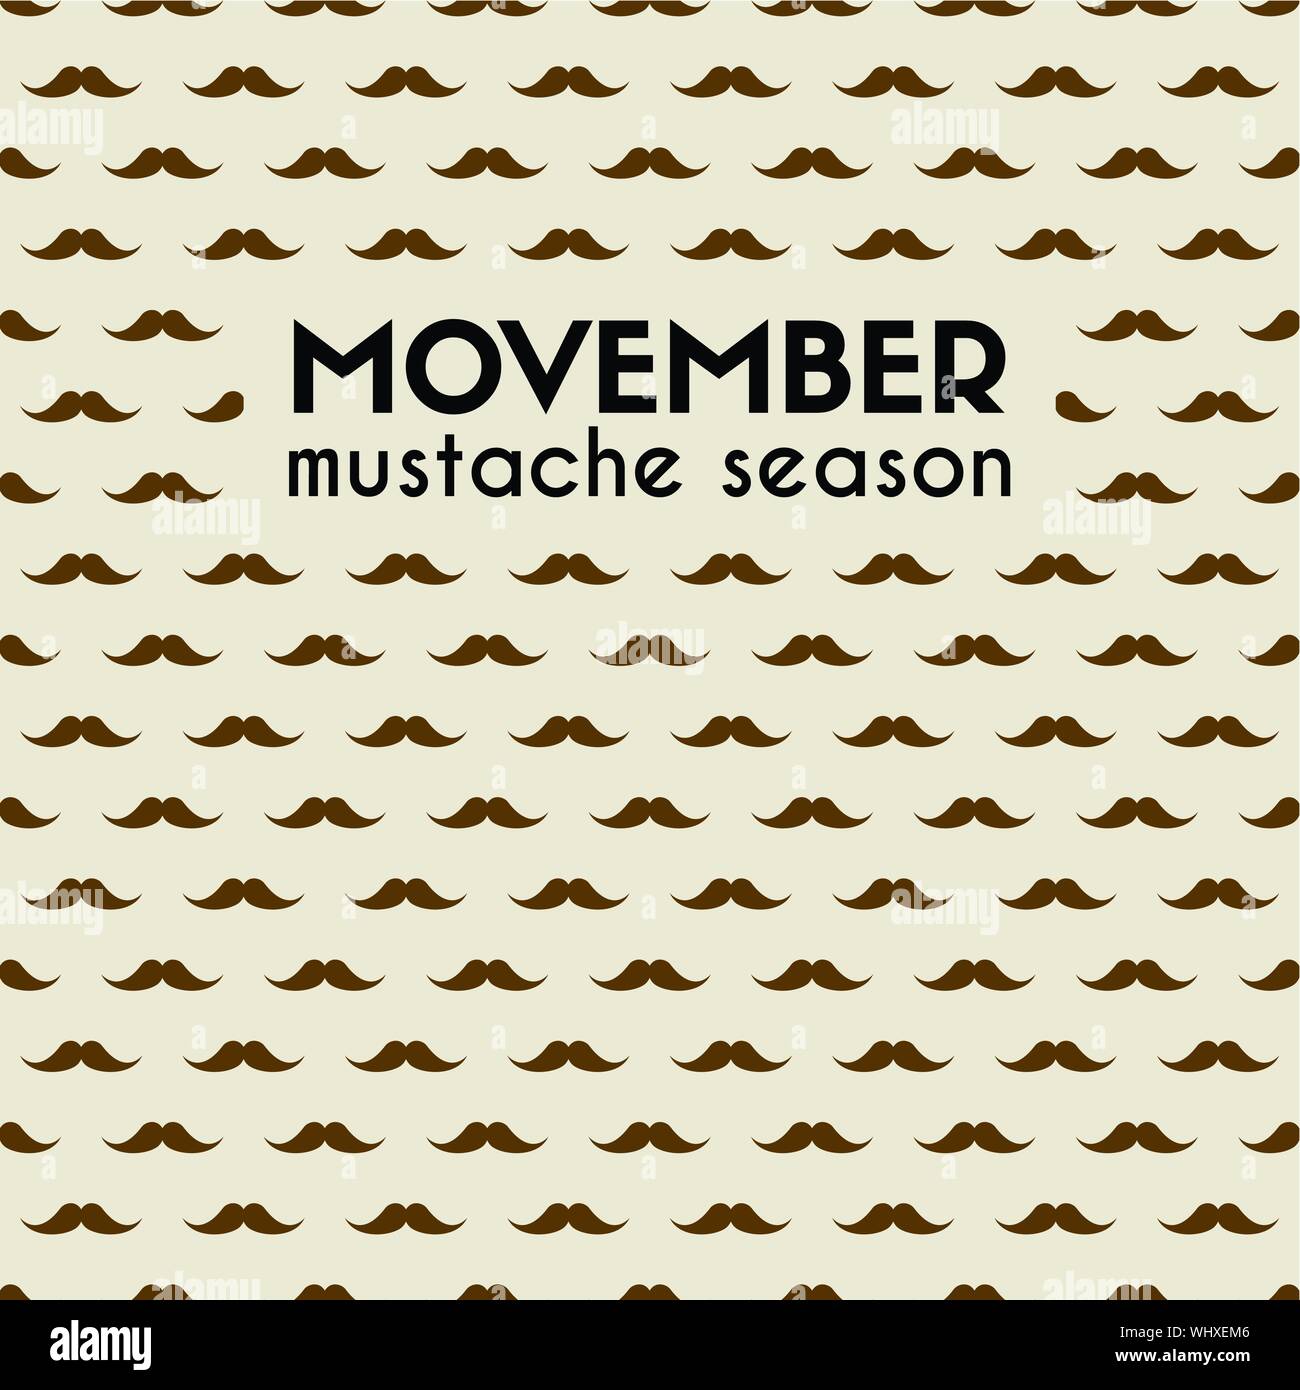 Movember. Mustache season. Vector greeting card with mustache pattern Stock Vector